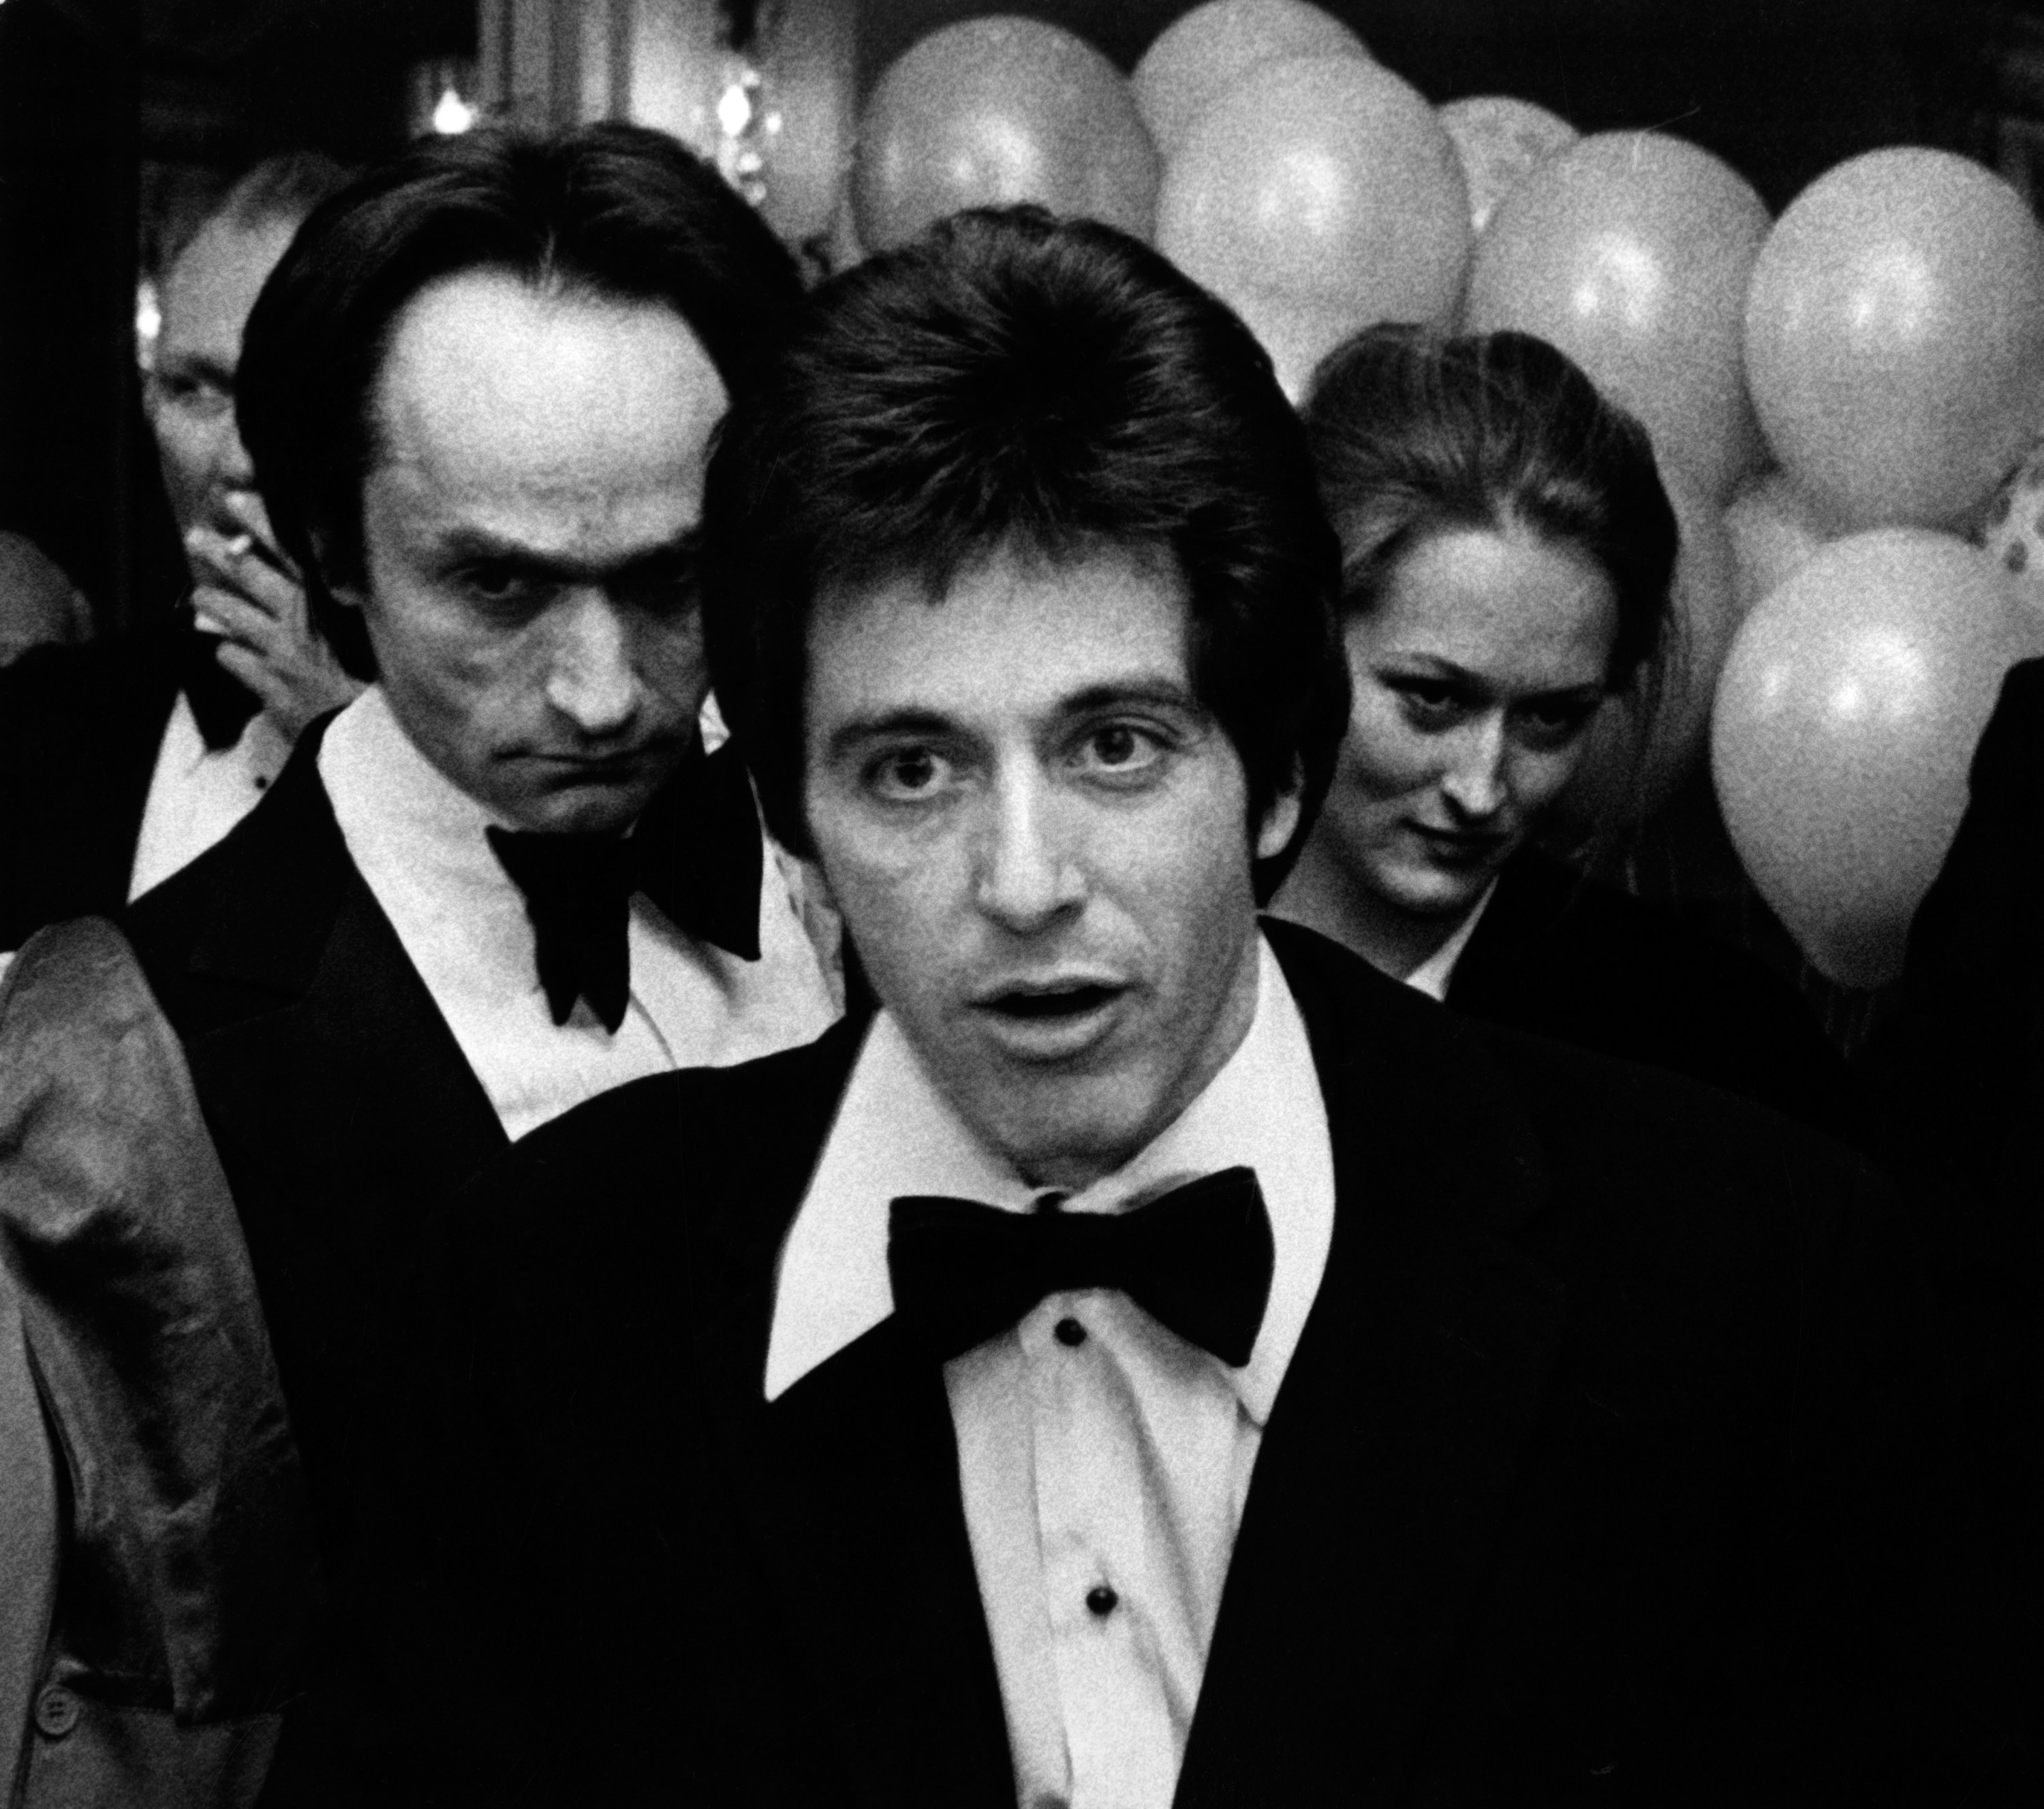 John Cazale and Meryl Streep behind Al Pacino at Lee Strasberg's 75th birthday party on November 29, 1976 |  Source: Getty Images